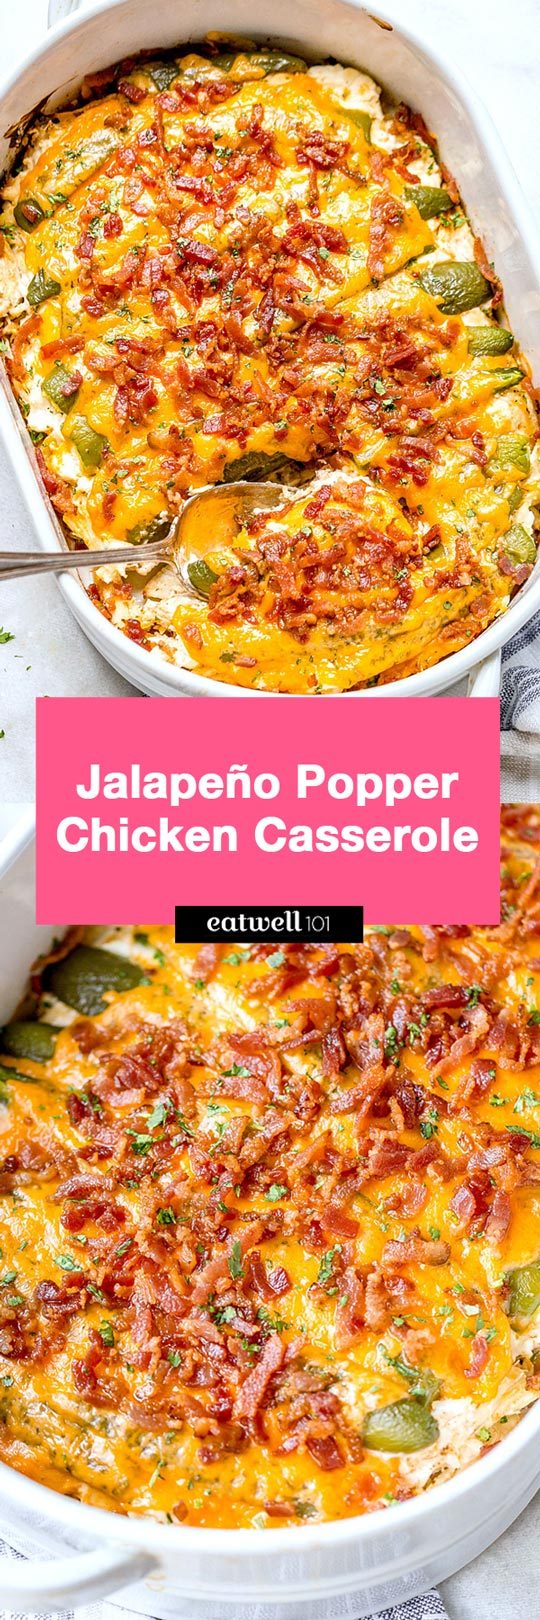 Jalapeño popper chicken casserole – #eatwell101 #recipe So quick and easy.  Everyone will love this delicious chicken casserole recipe! #Jalapeñopopper #chicken #casserole #recipe #cheddar #bacon